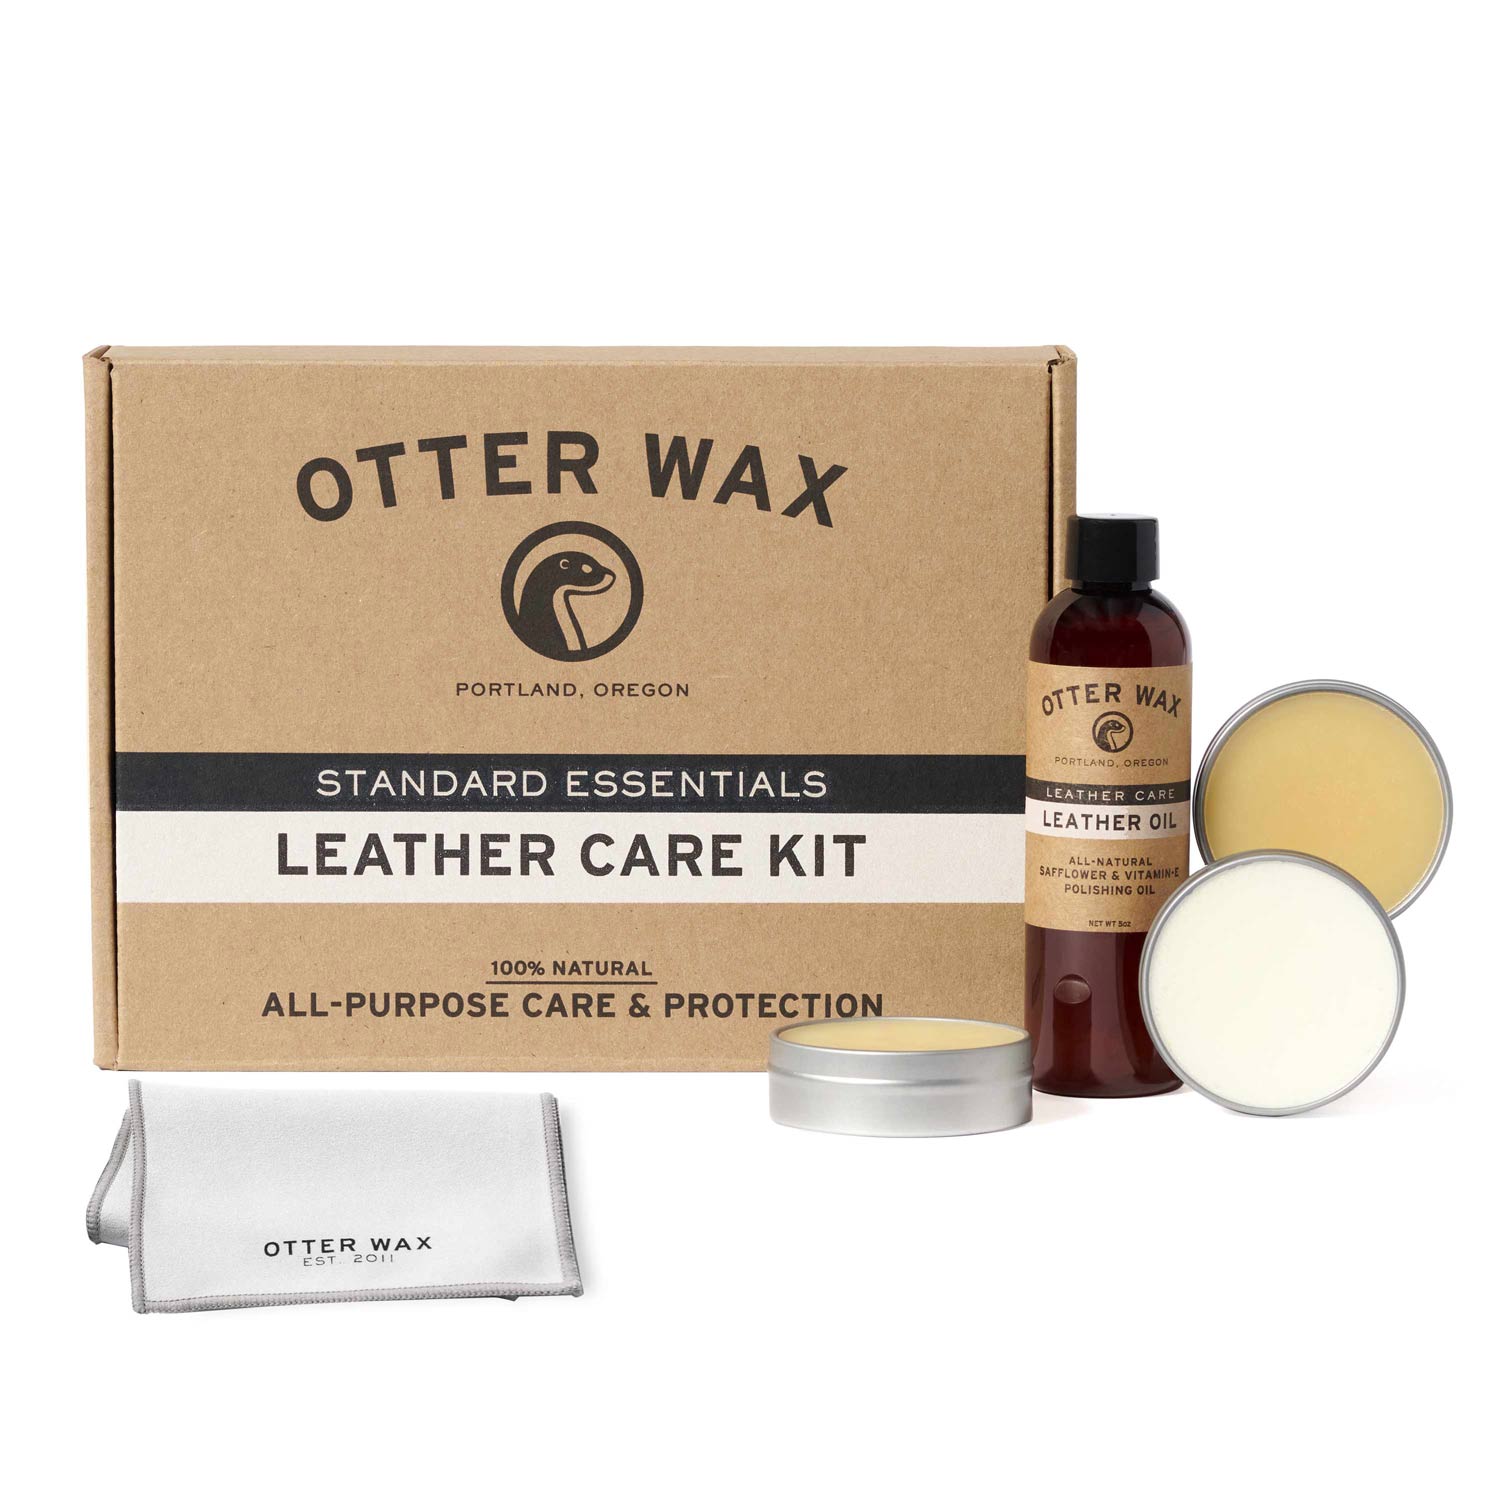 Otter Wax Leather Care Kit | Best Leather Care Products To Condition Clean Waterproof And Polish Leather Boots Jackets Furniture Auto Seats And Car Interiors Bags Cases And More